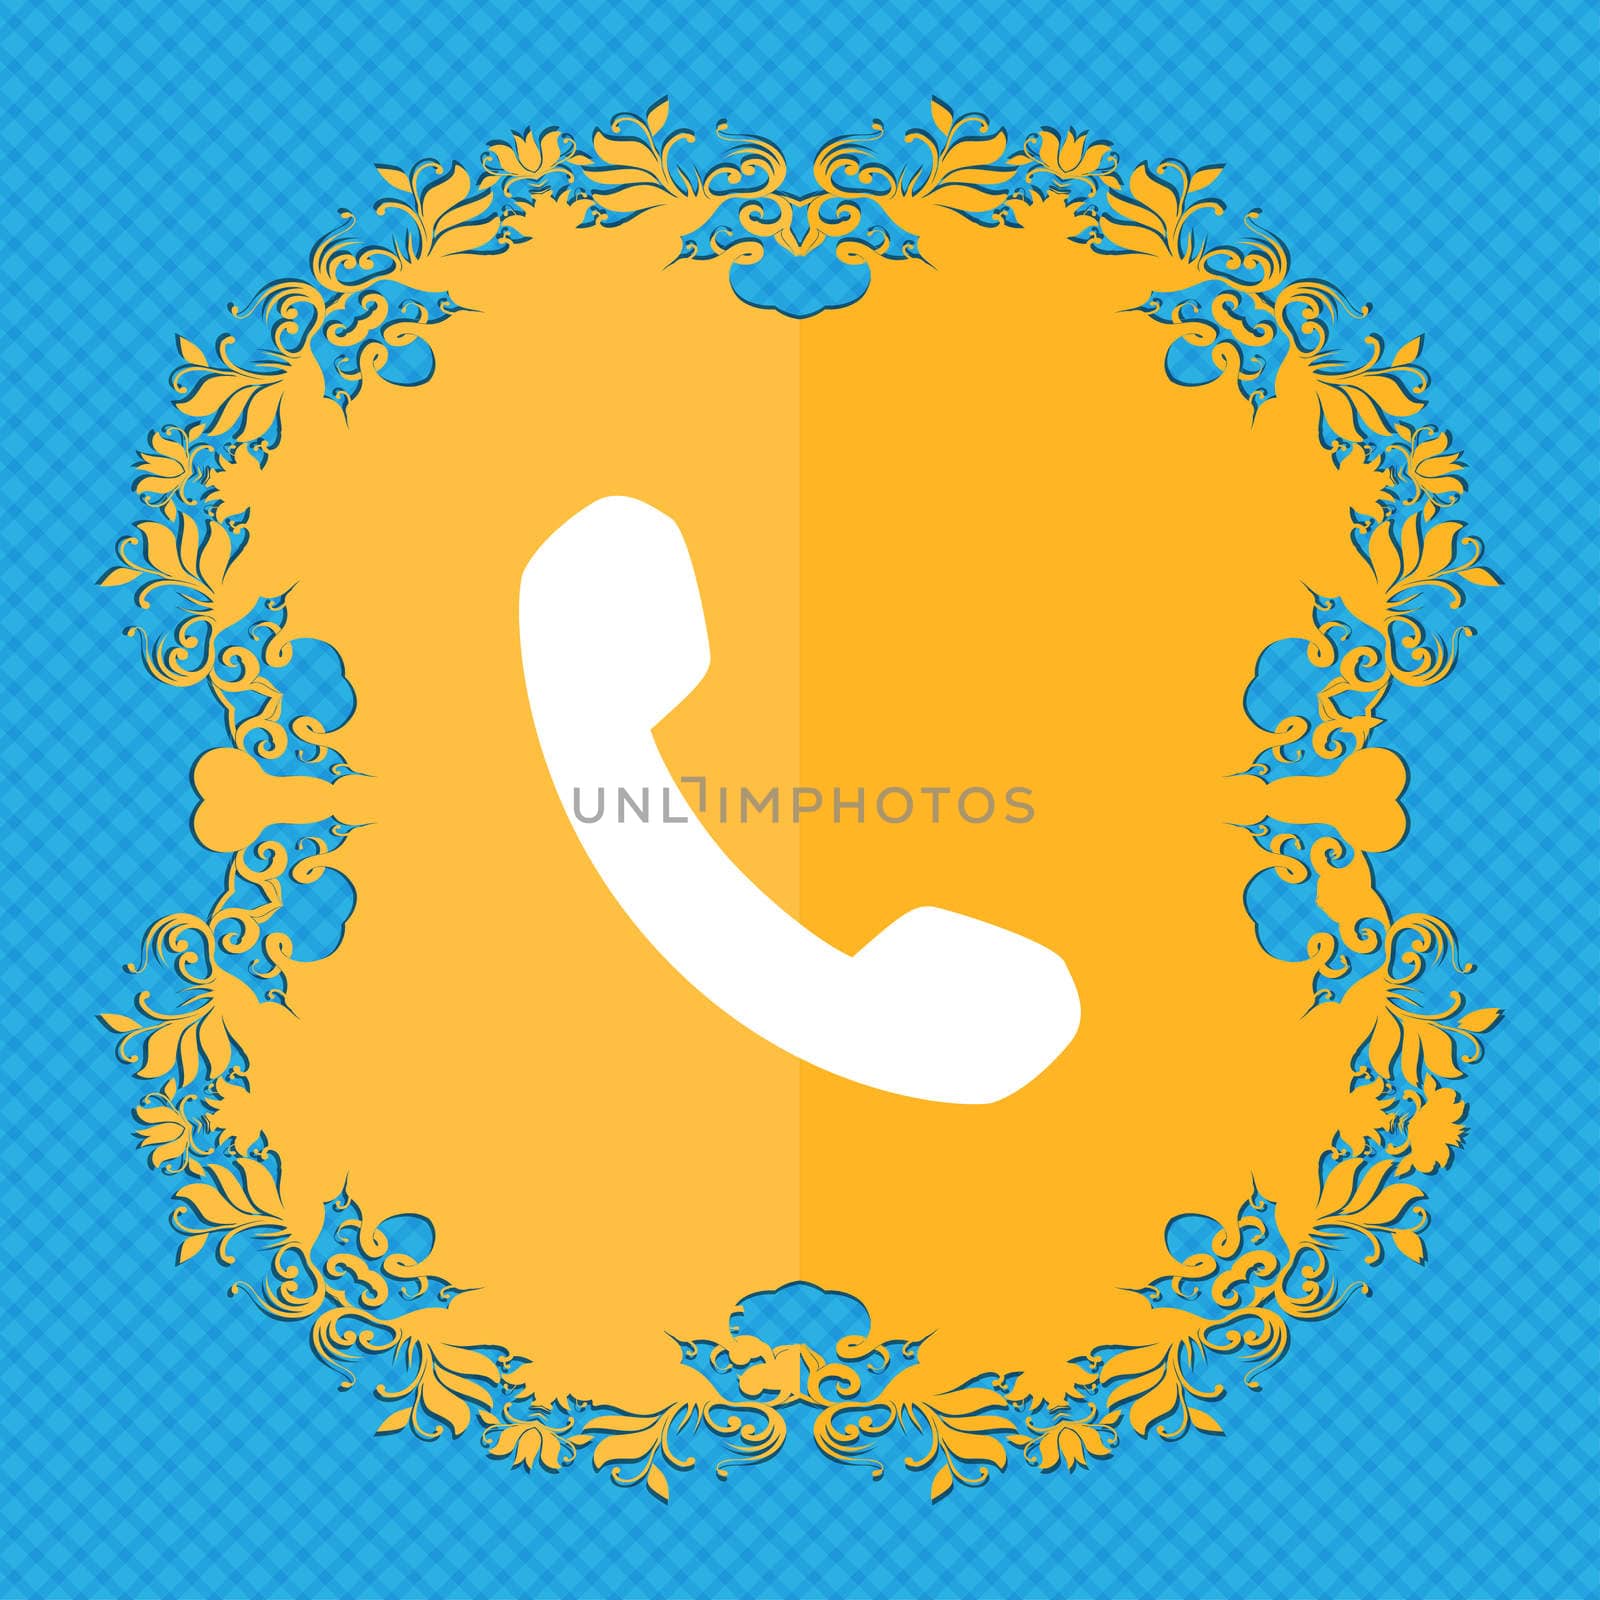 Phone, Support, Call center . Floral flat design on a blue abstract background with place for your text. illustration